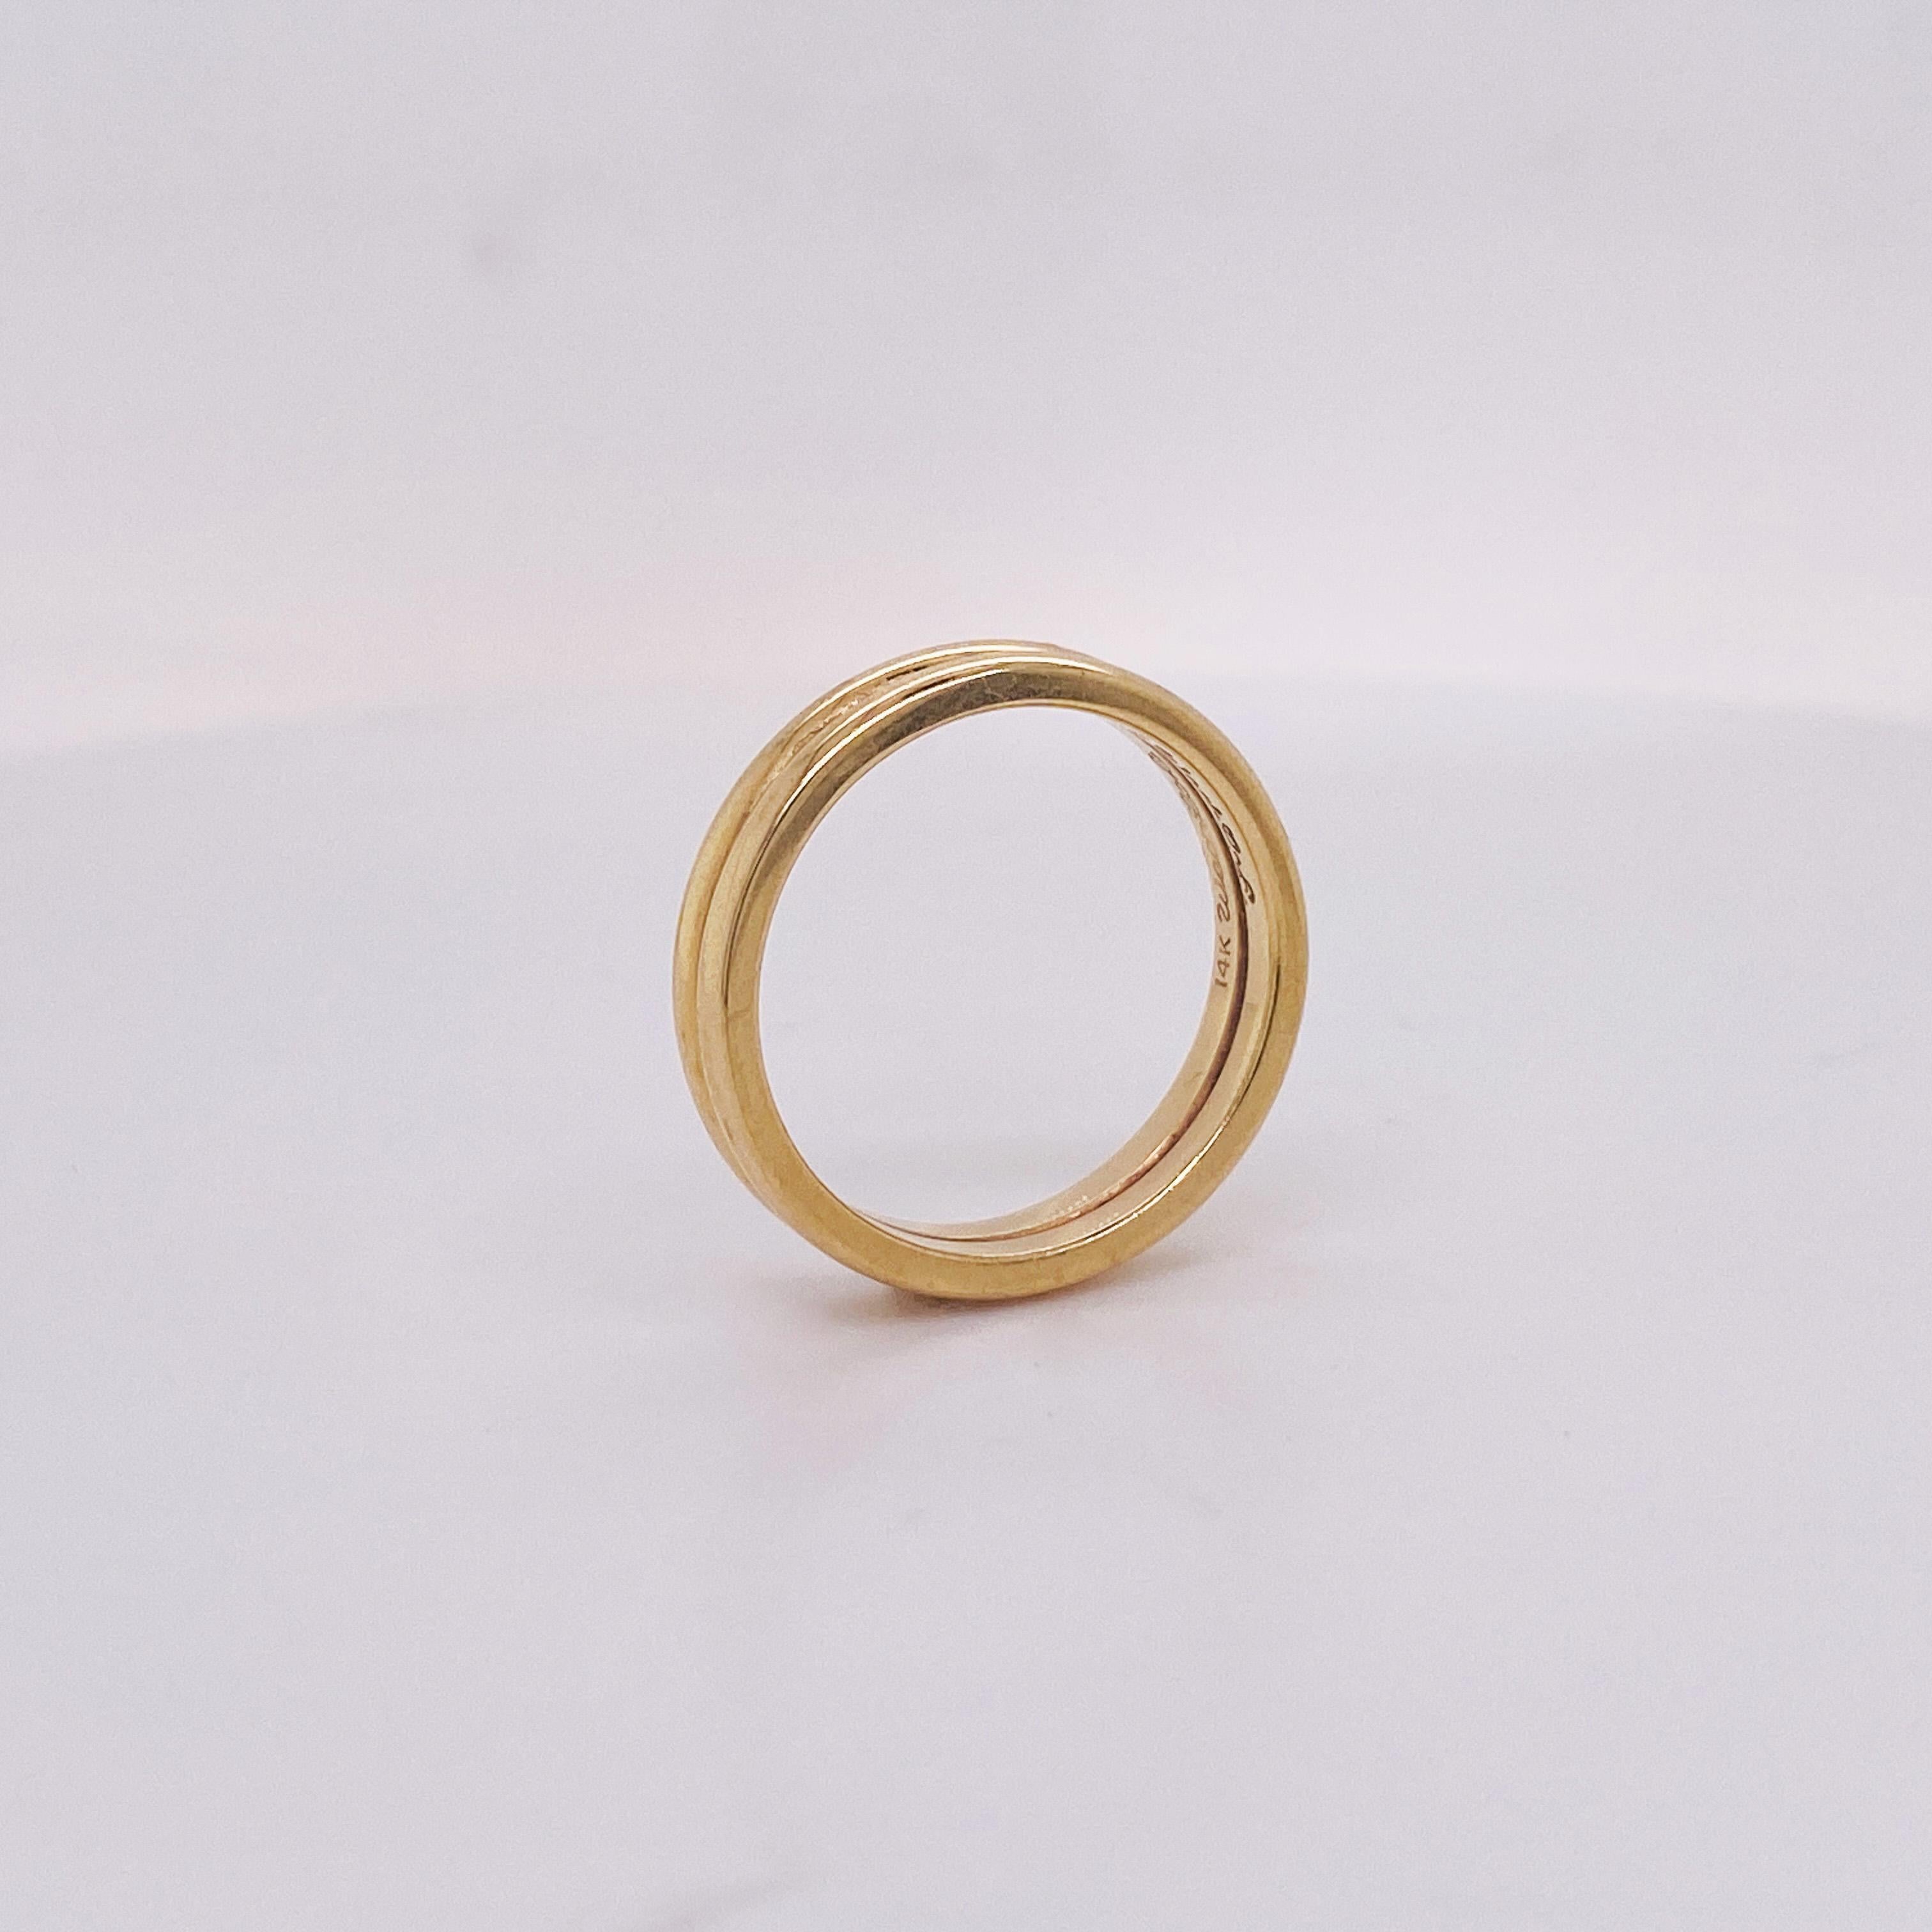 These twin bands form one ring in a simple and classic style double dome wedding band. These rings were made in 1950 and you could wear this well-preserved piece of history every day! Two identical slender bands are soldered securely together into a